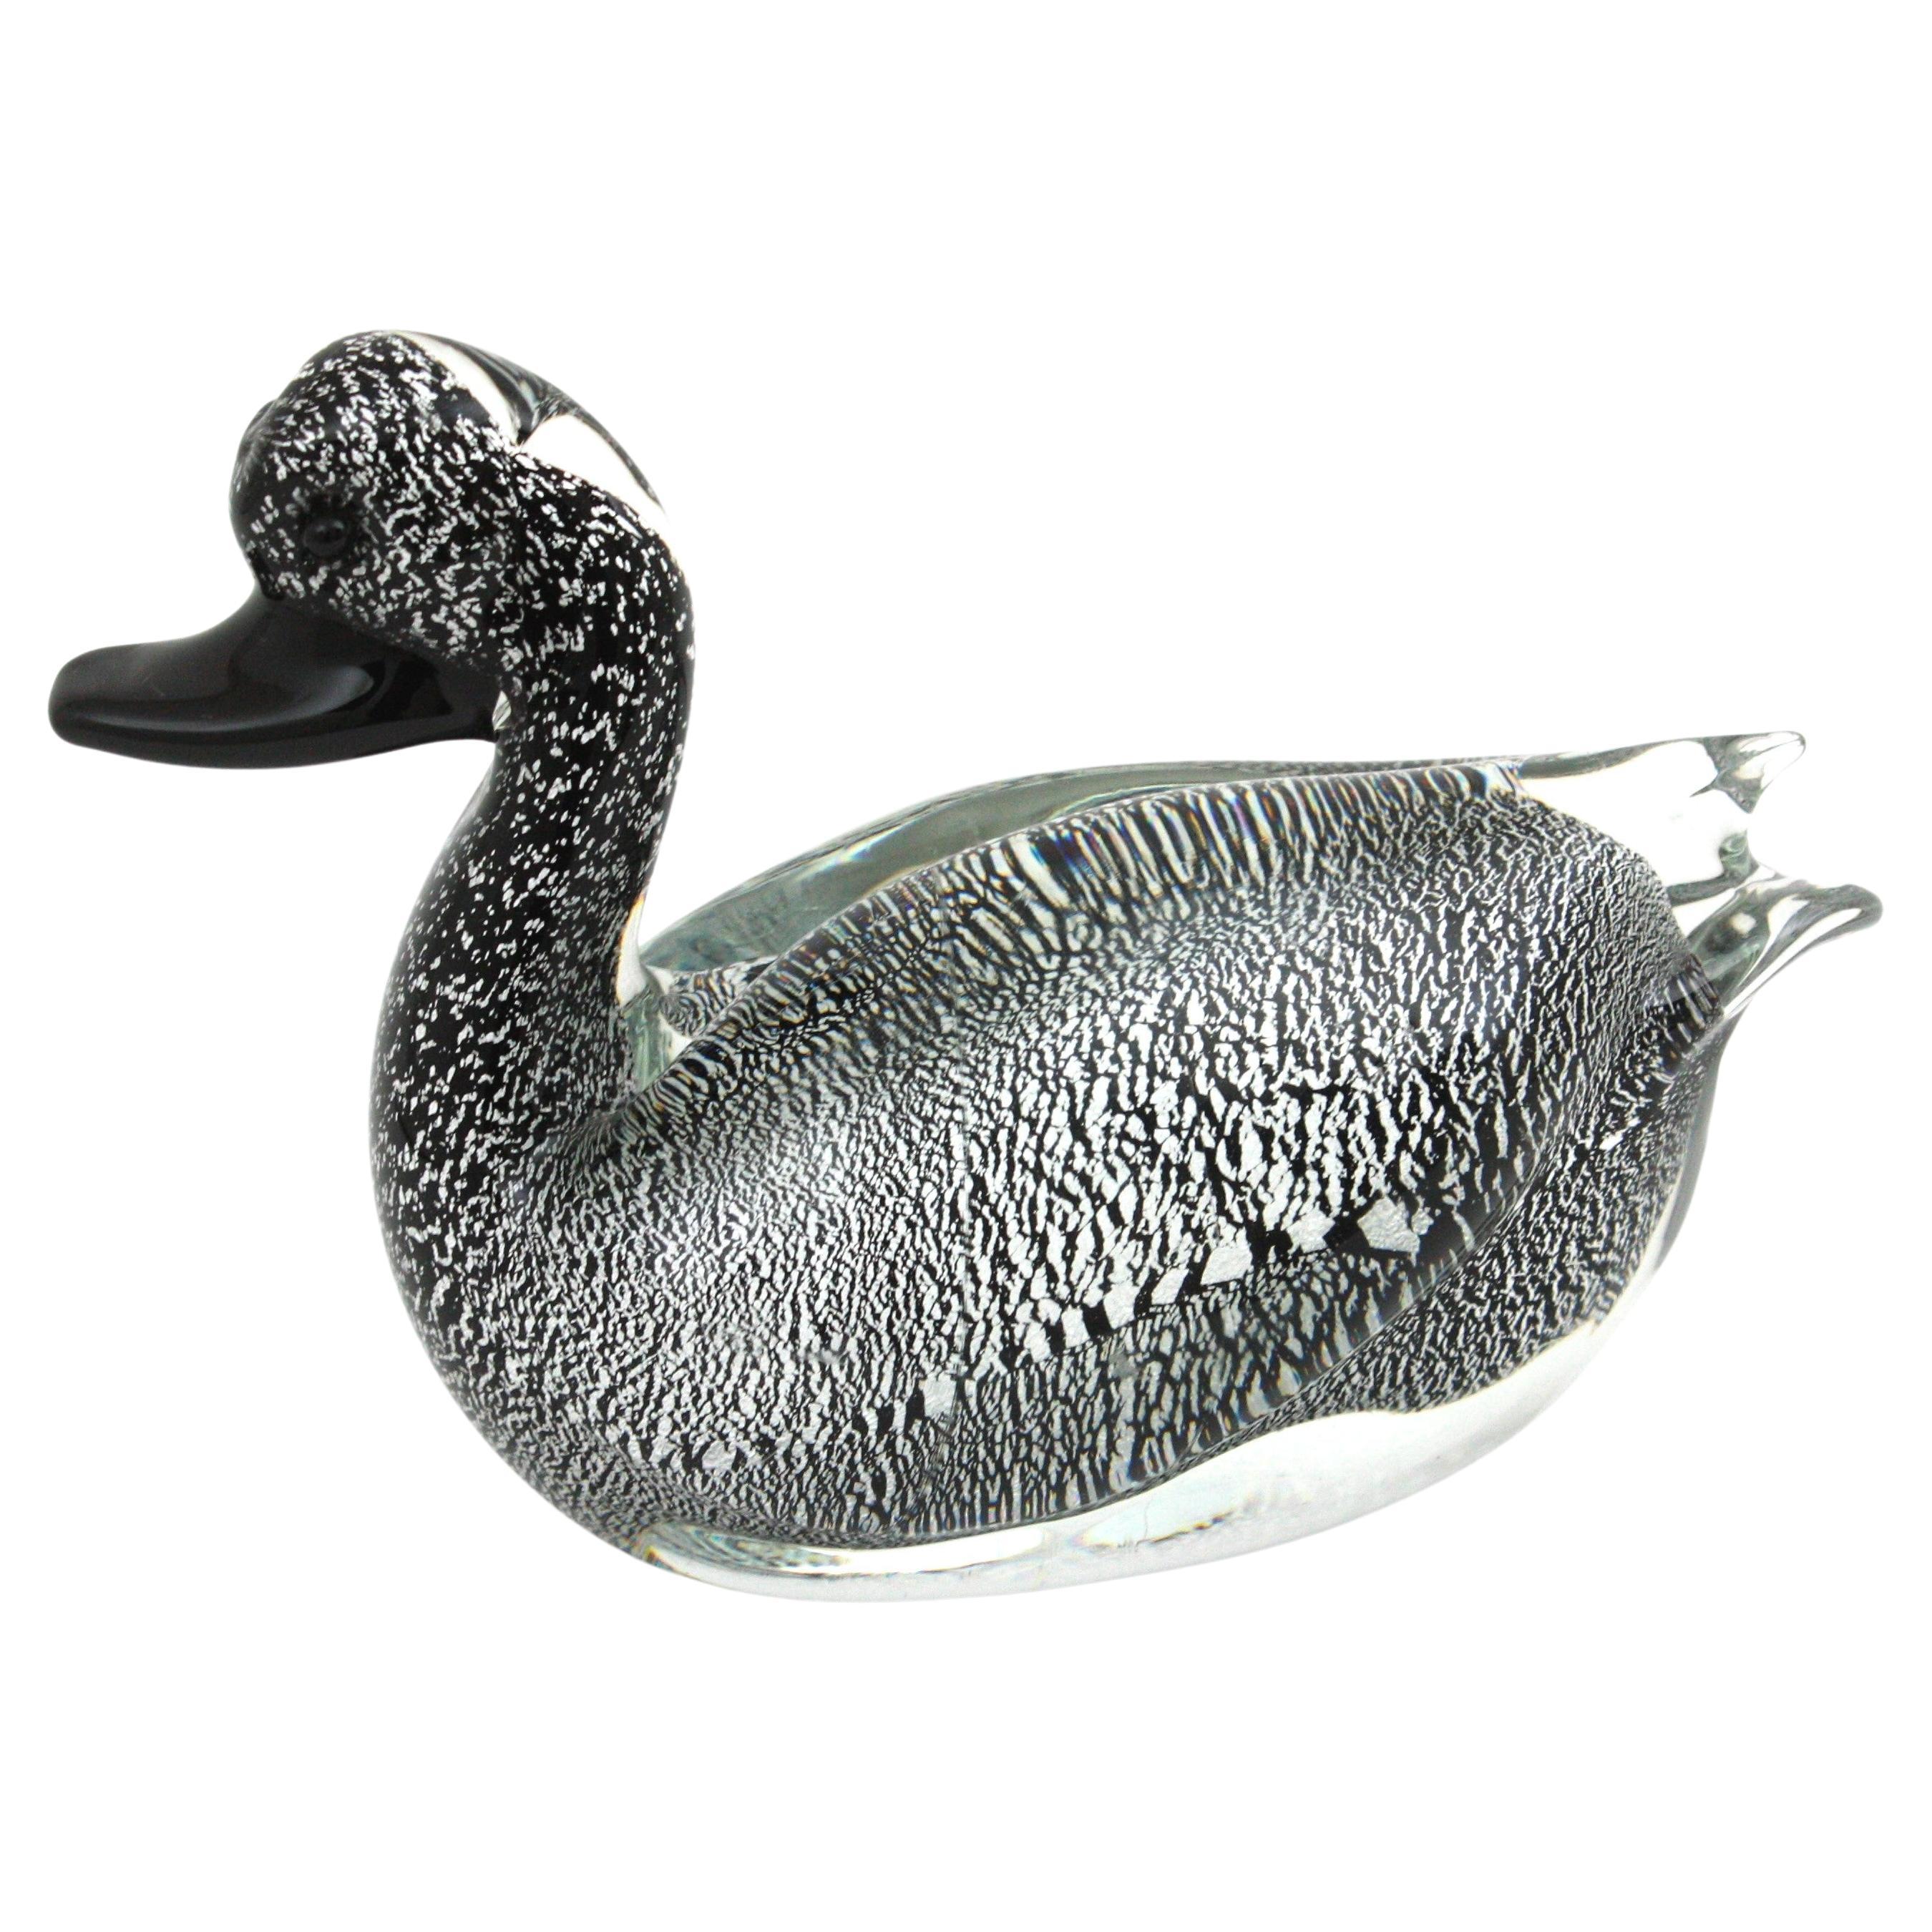  Murano Black Clear Duck Sculpture Art Glass Paperweight with Silver Flecks For Sale